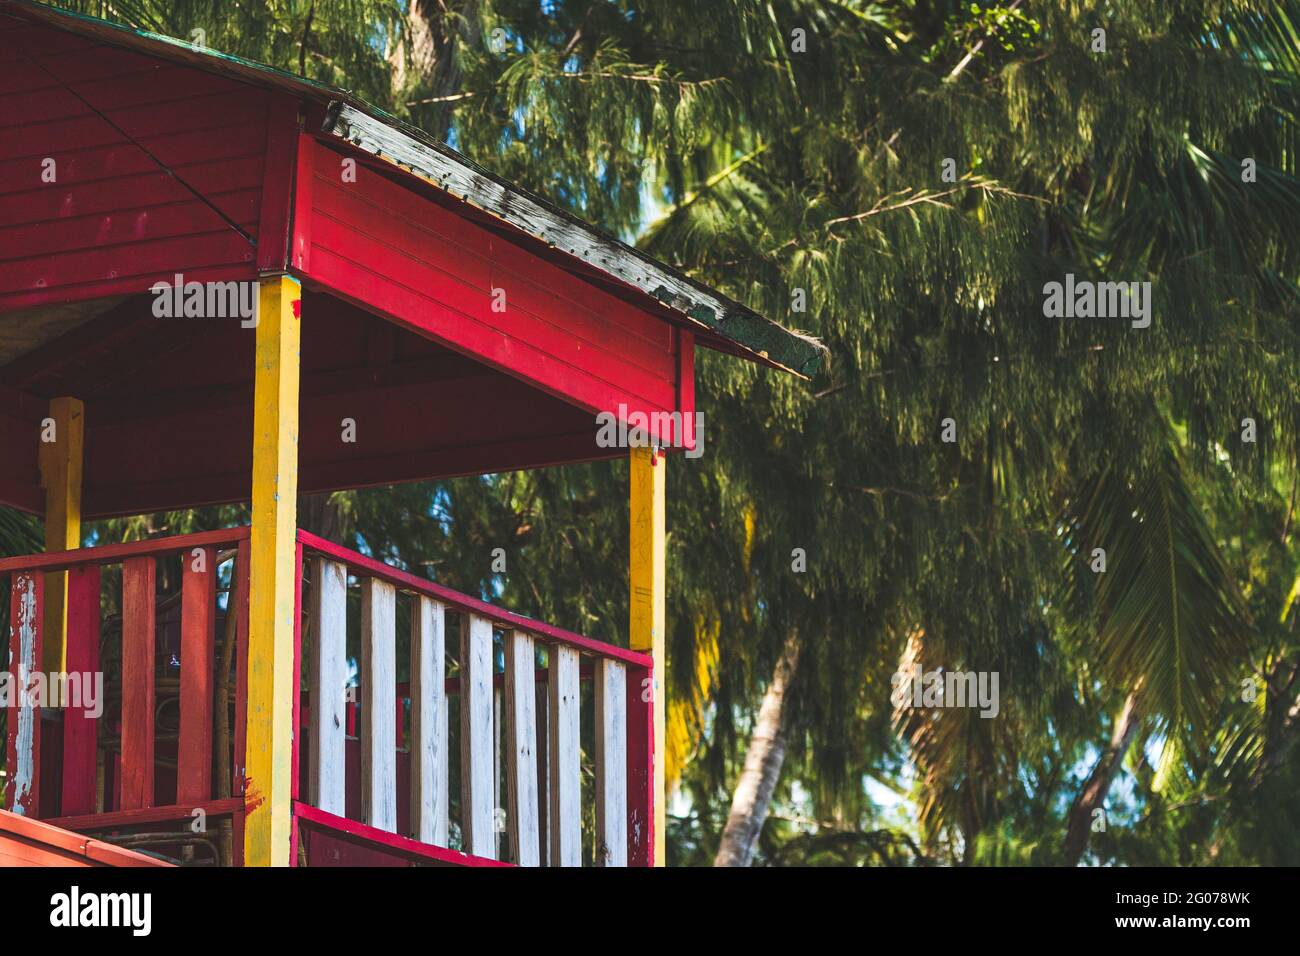 Close up of Red Lifeguard hut on tropical beach Stock Photo